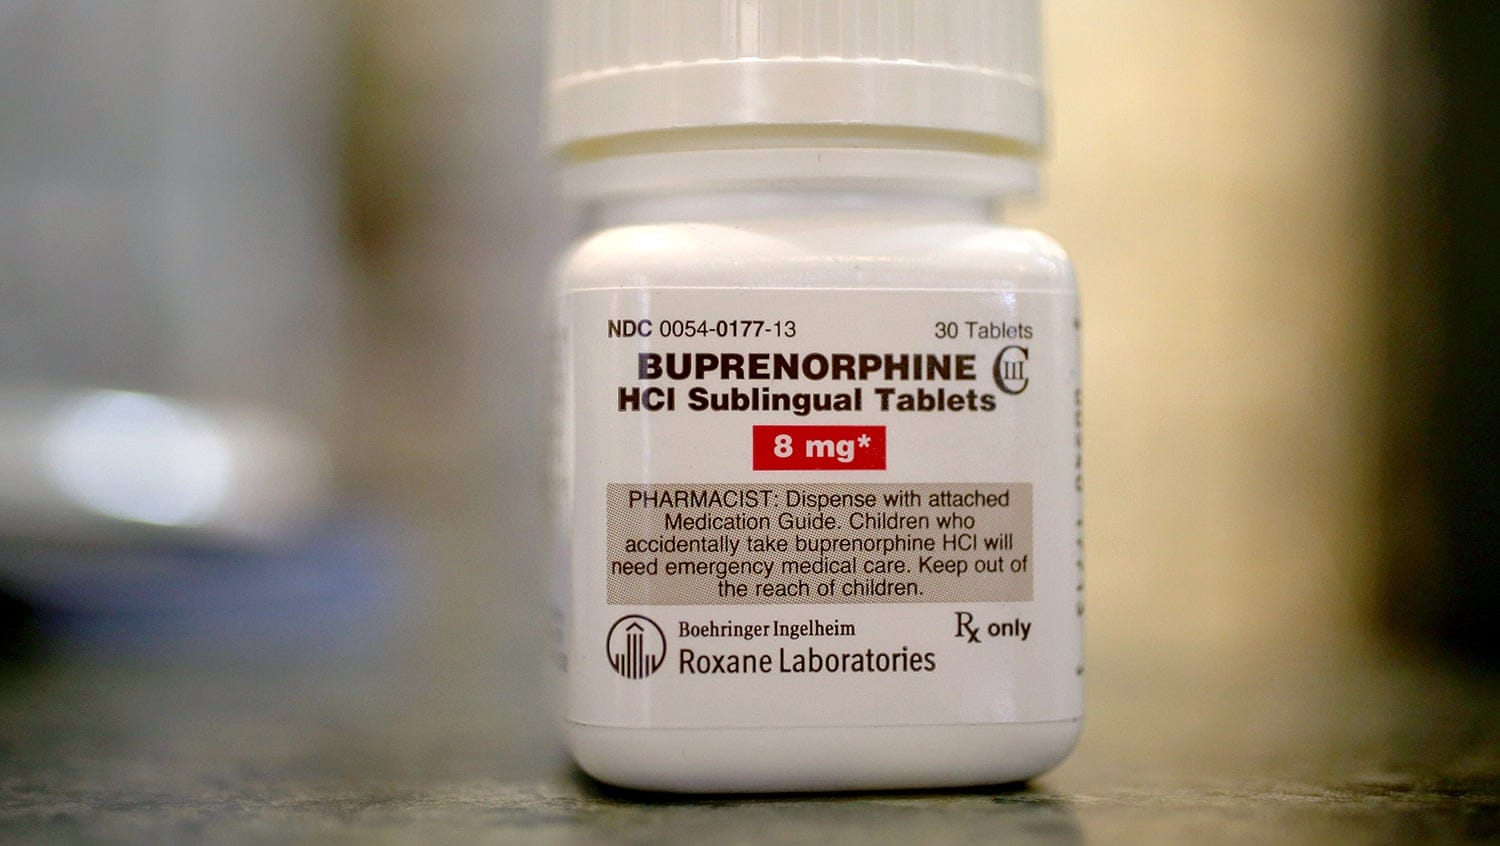 Bottle of buprenorphine pills, an FDA-approved medication for the treatment of opioid use disorder